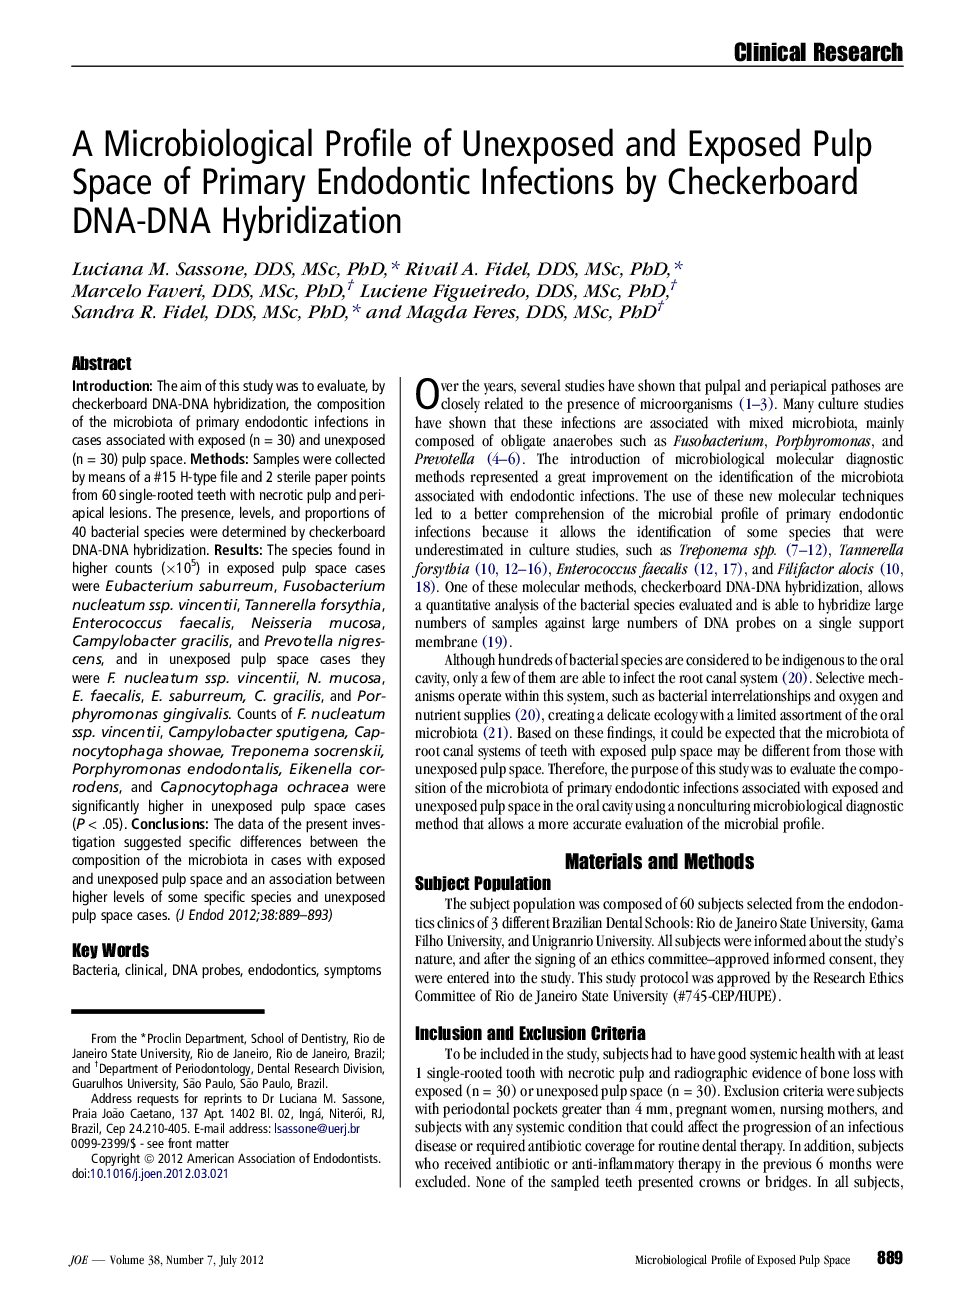 A Microbiological Profile of Unexposed and Exposed Pulp Space of Primary Endodontic Infections by Checkerboard DNA-DNA Hybridization